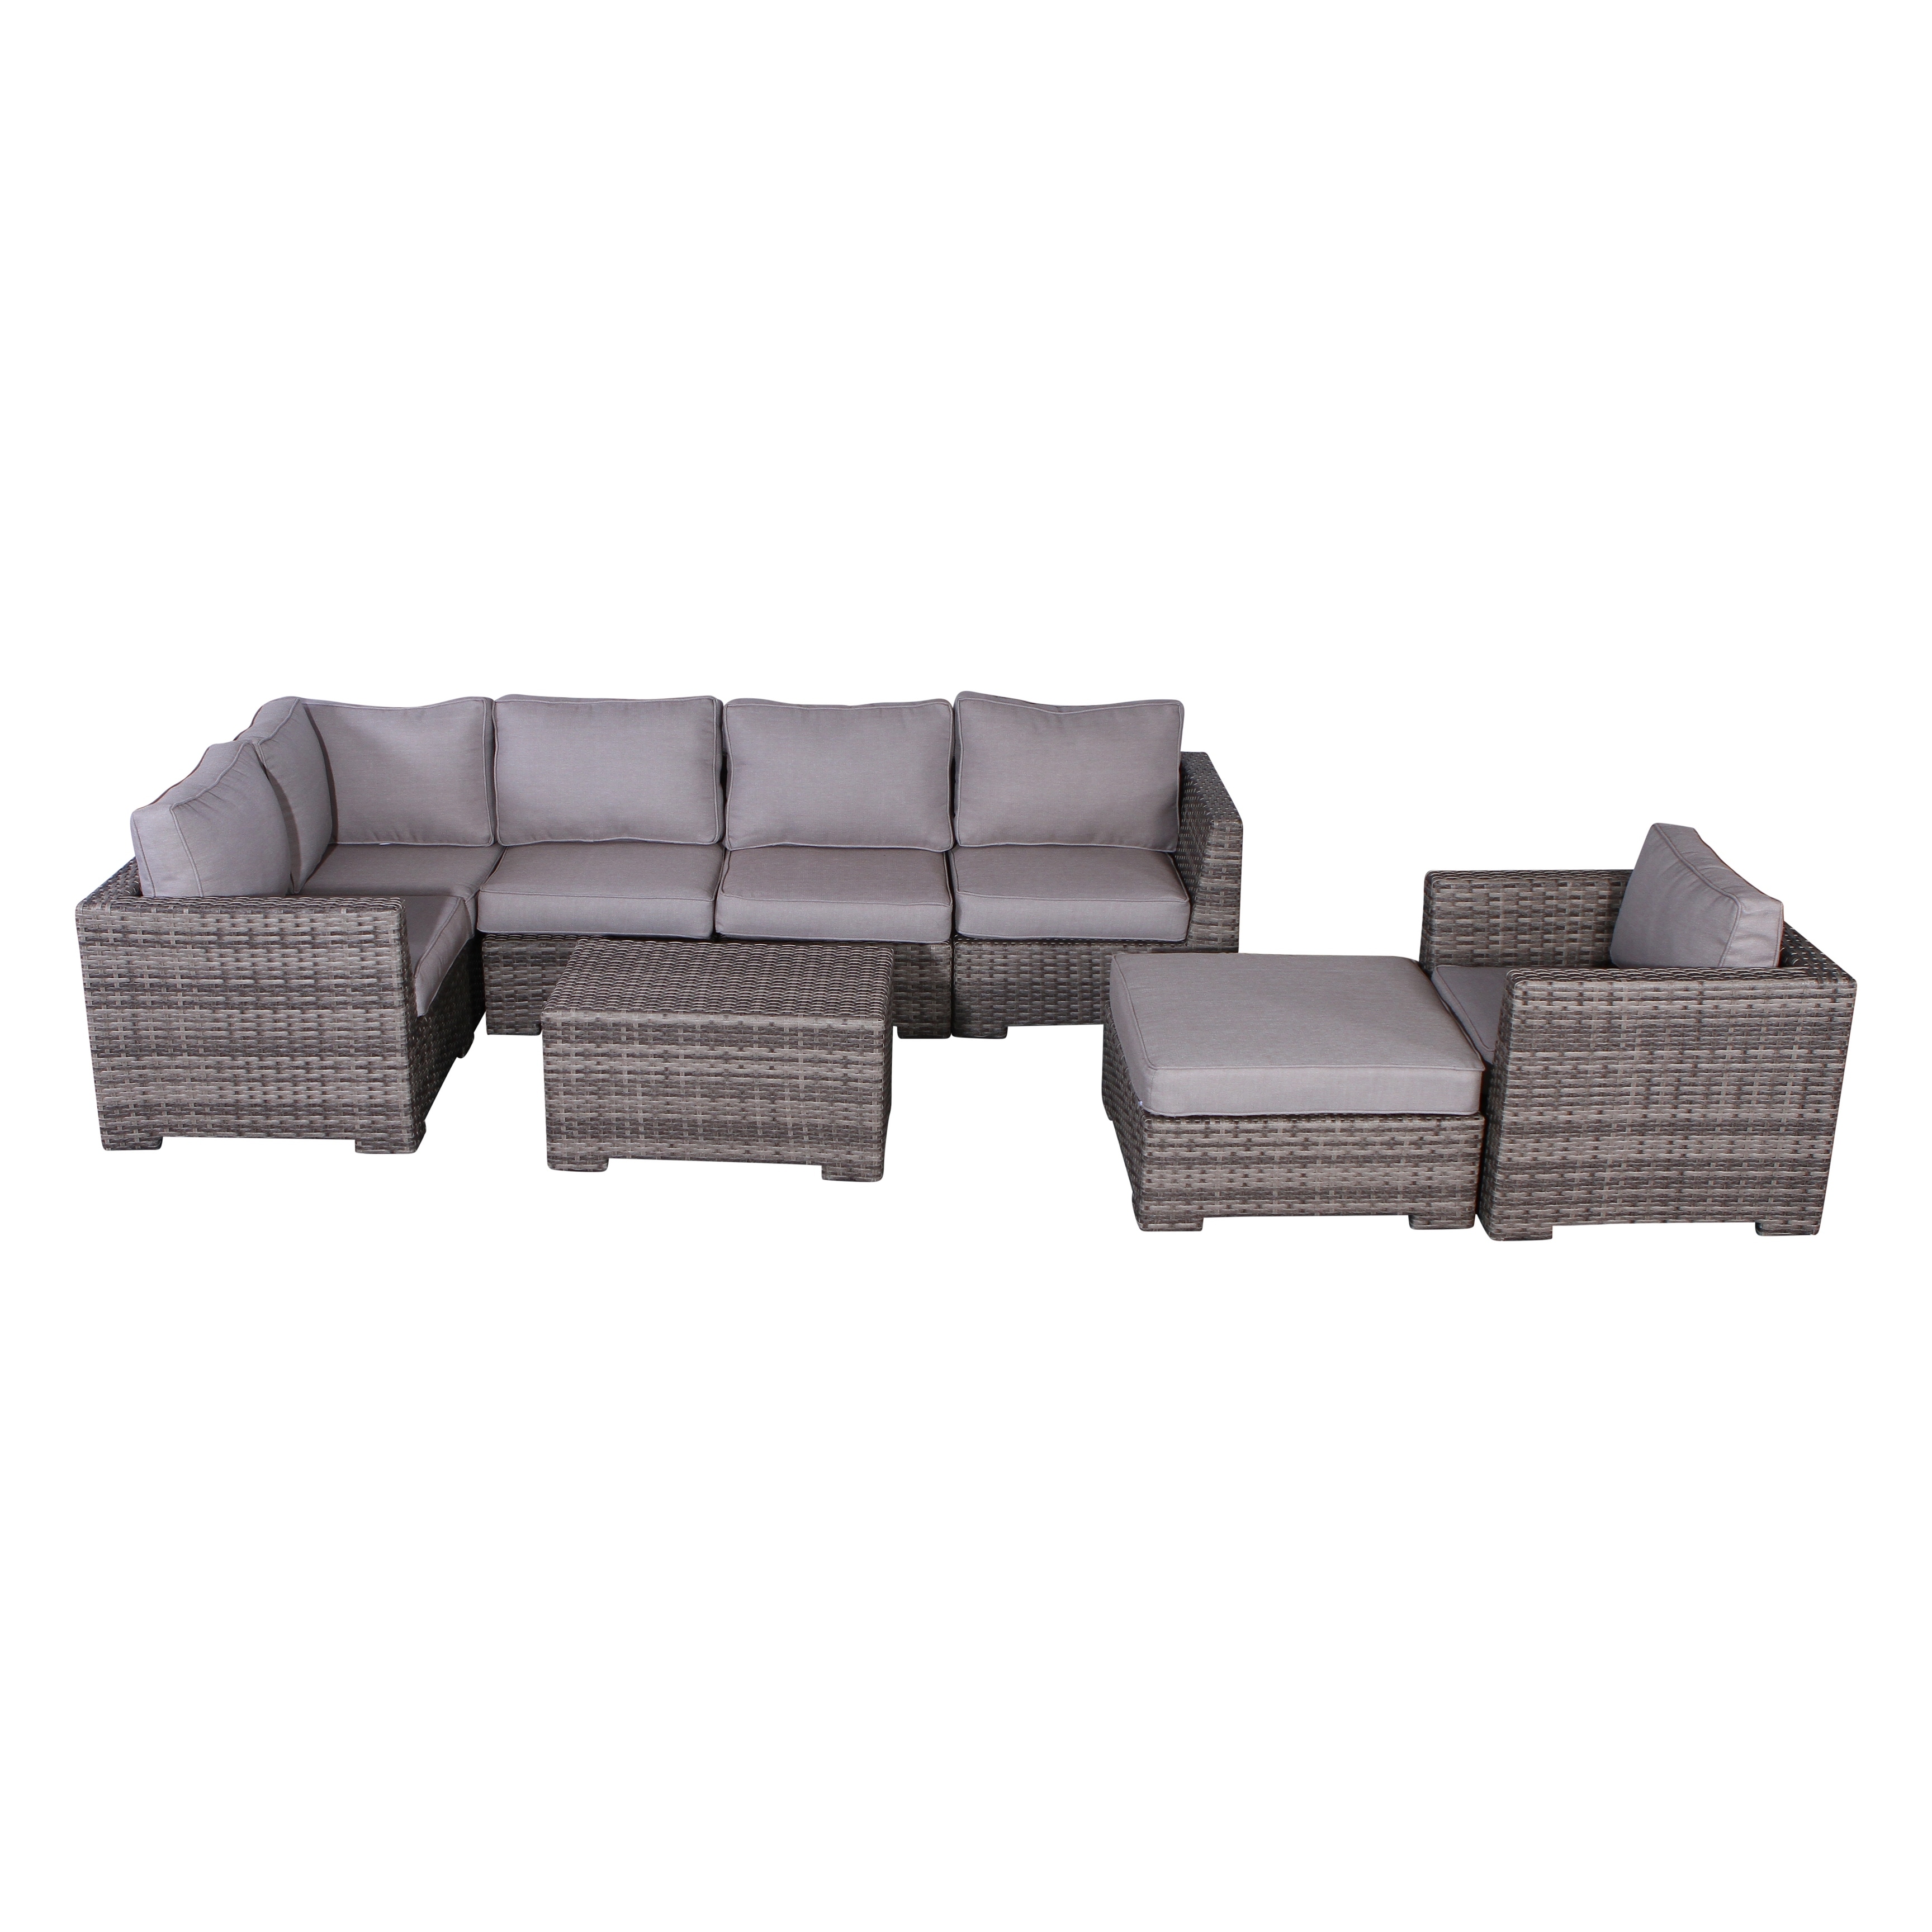 Lsi 8 Piece Sectional Set With Cushions